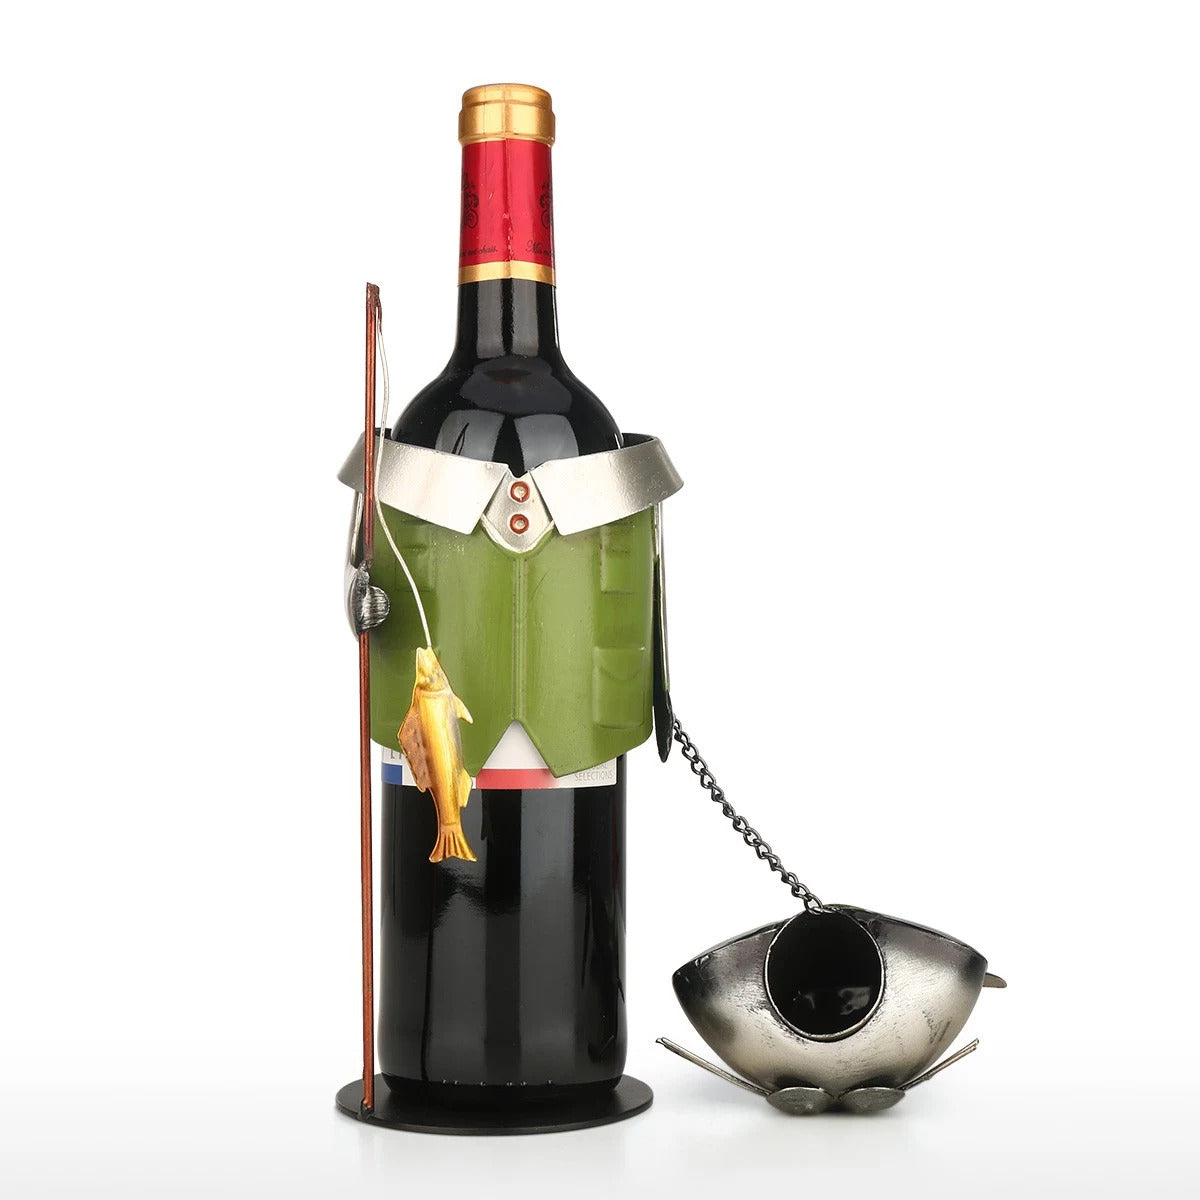 Gifts For Wine Lovers as Cat Ornaments